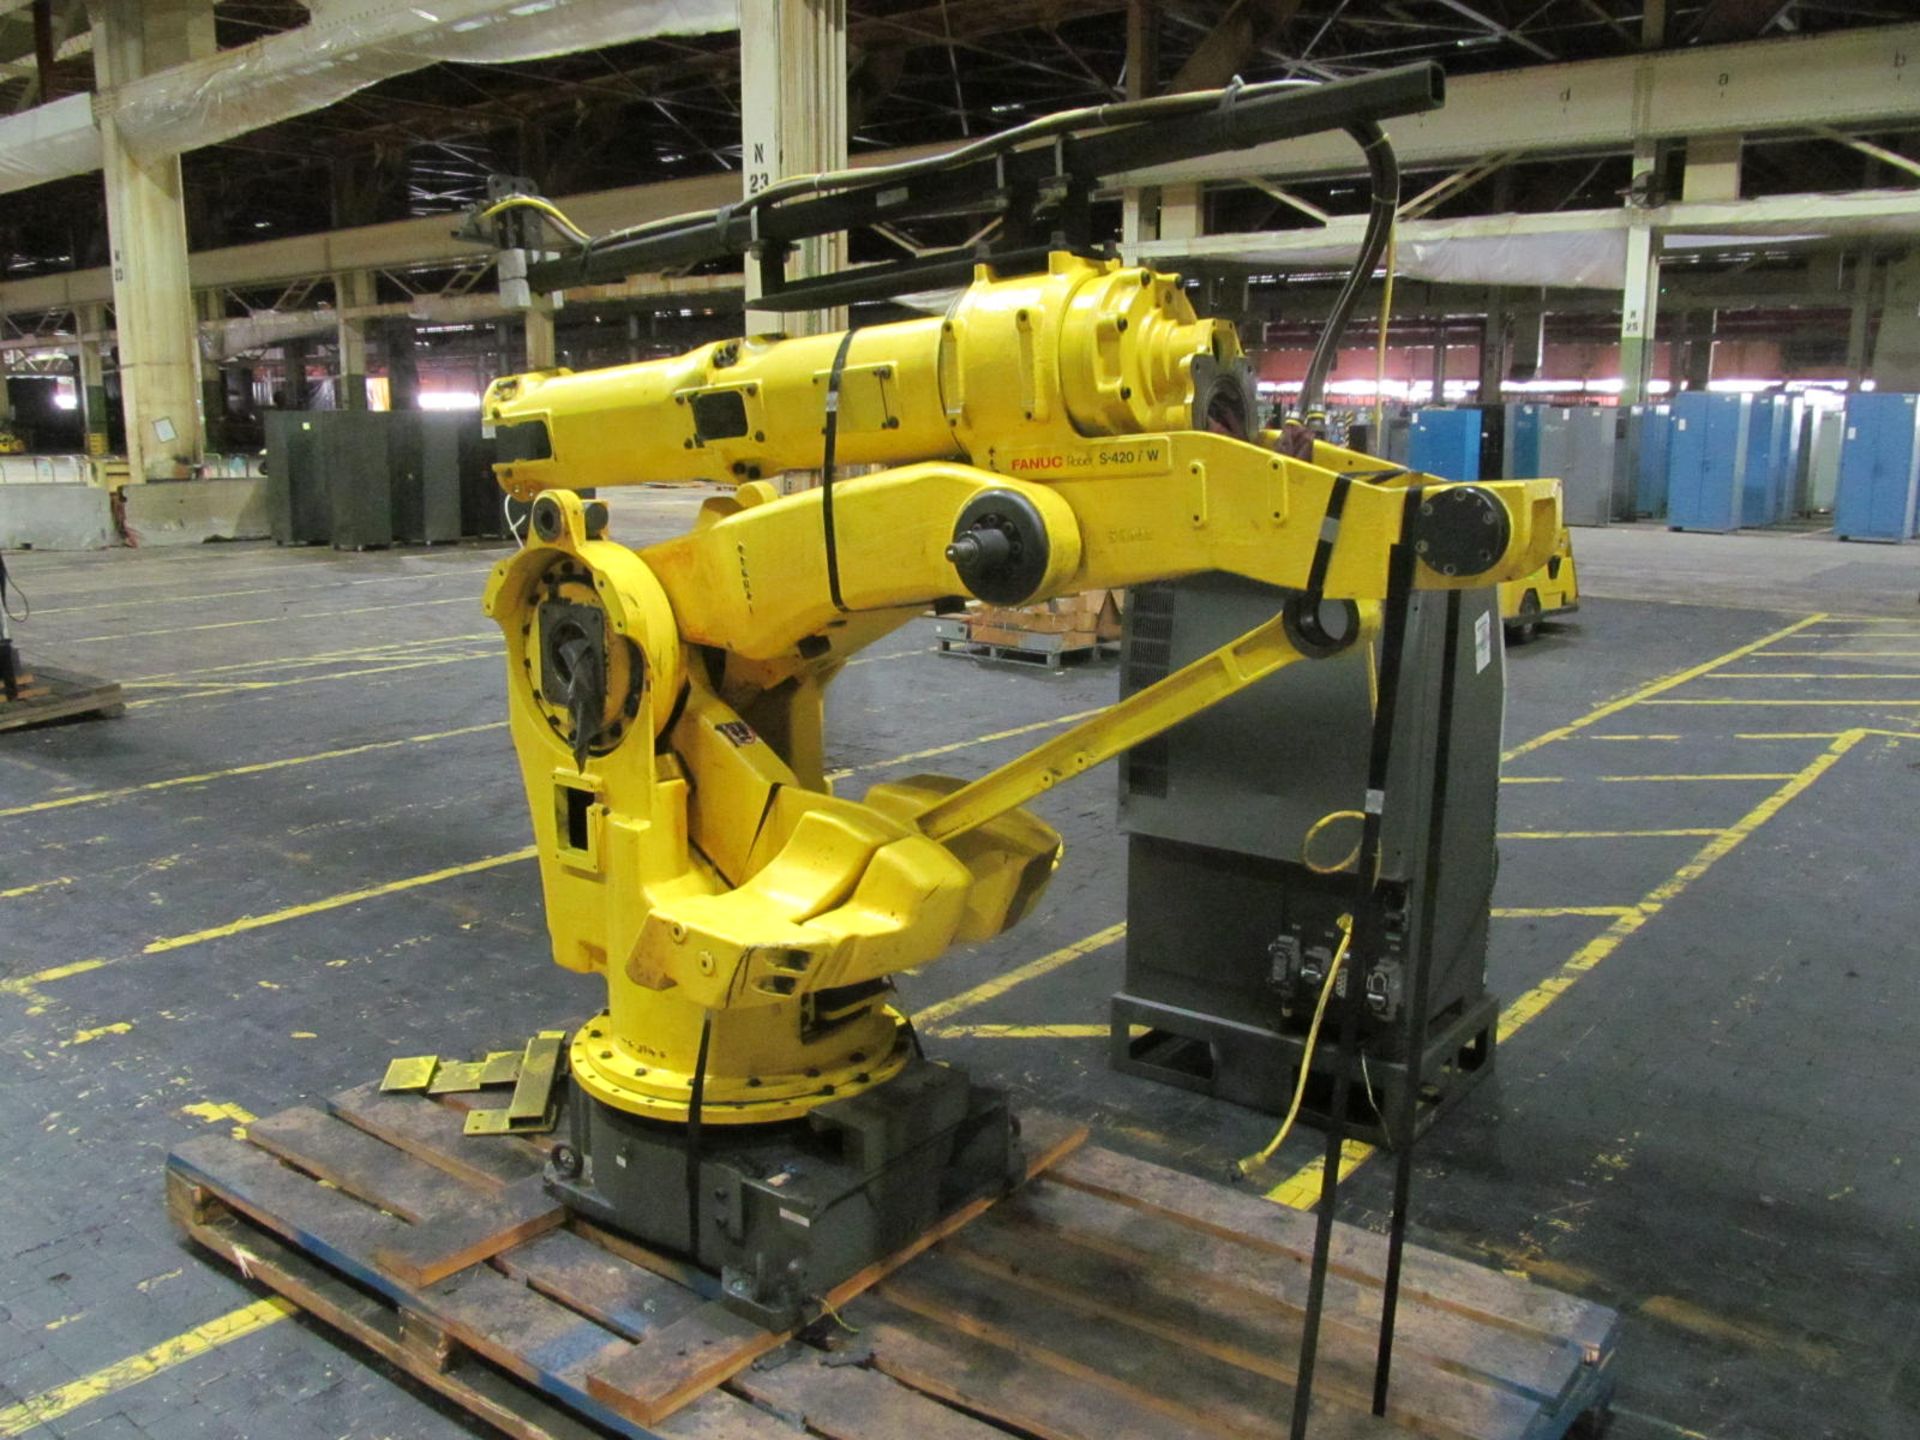 6-AXIS FANUC S-420iW ROBOT, PARTS MACHINE, R-2 CONTROL, (LOC.-O23) - Image 2 of 4